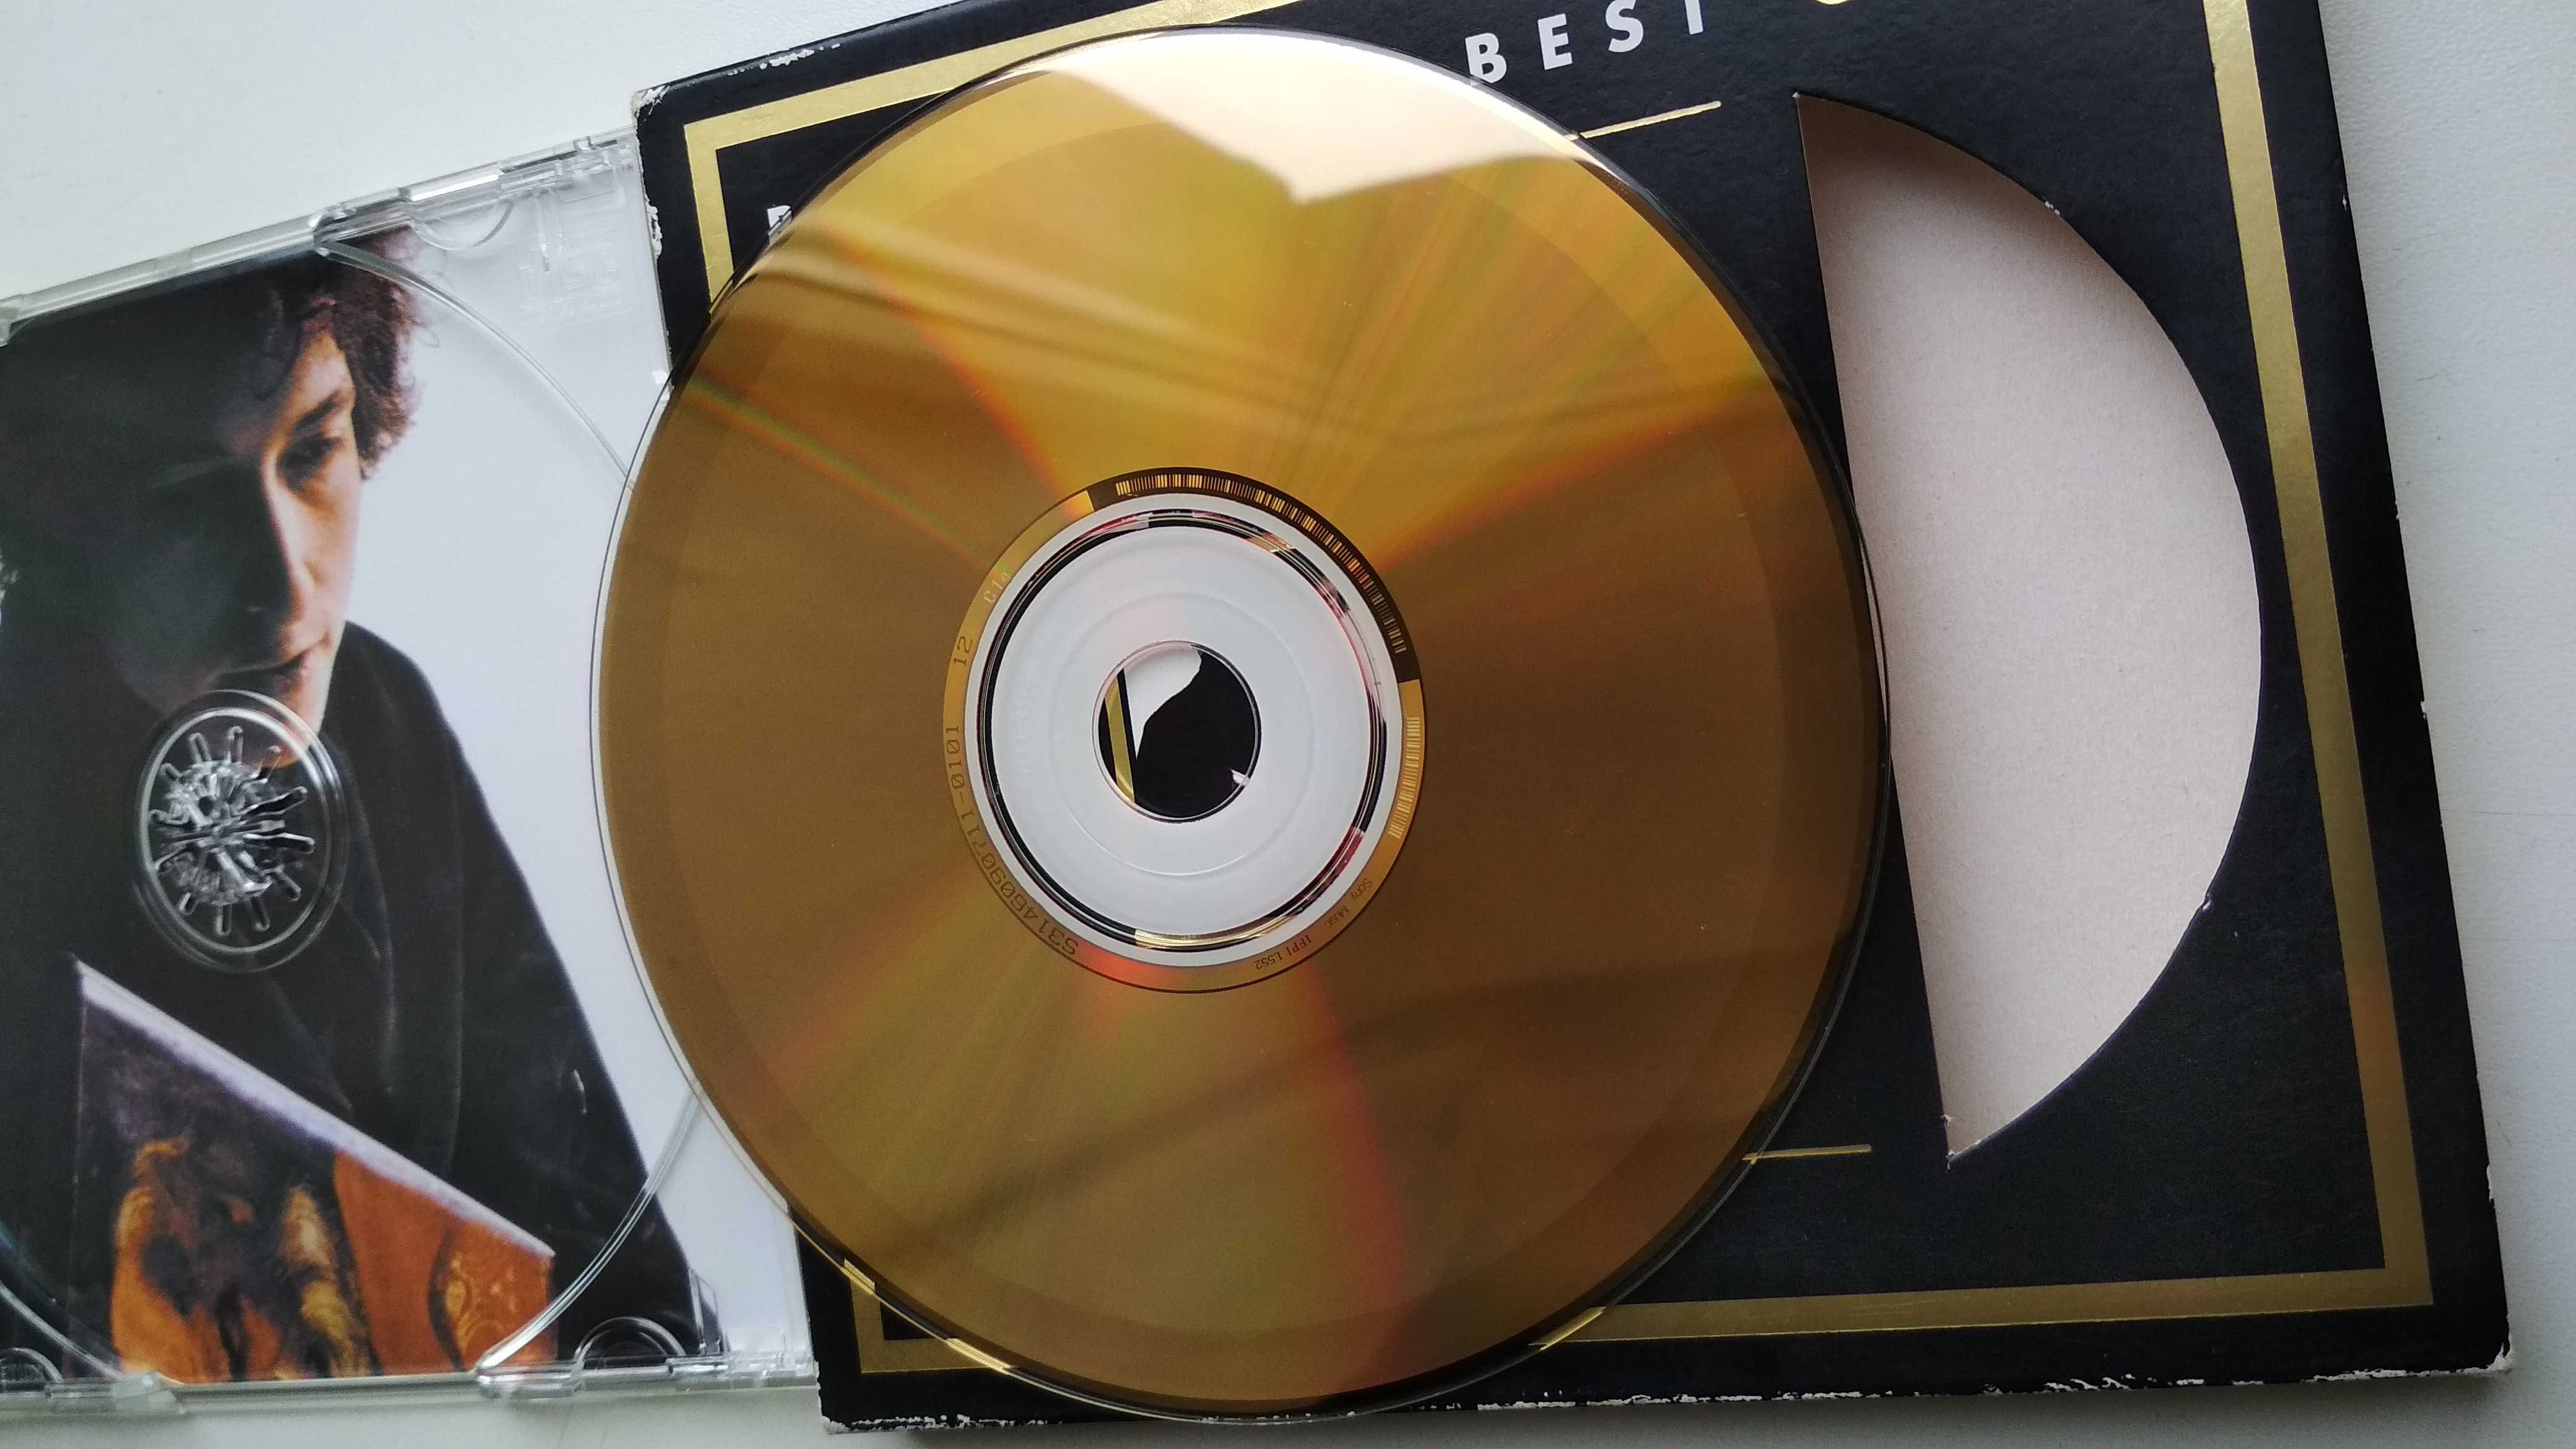 Bob Dylan Best of the Best Sony Austria Limited Edition 24K Gold CD